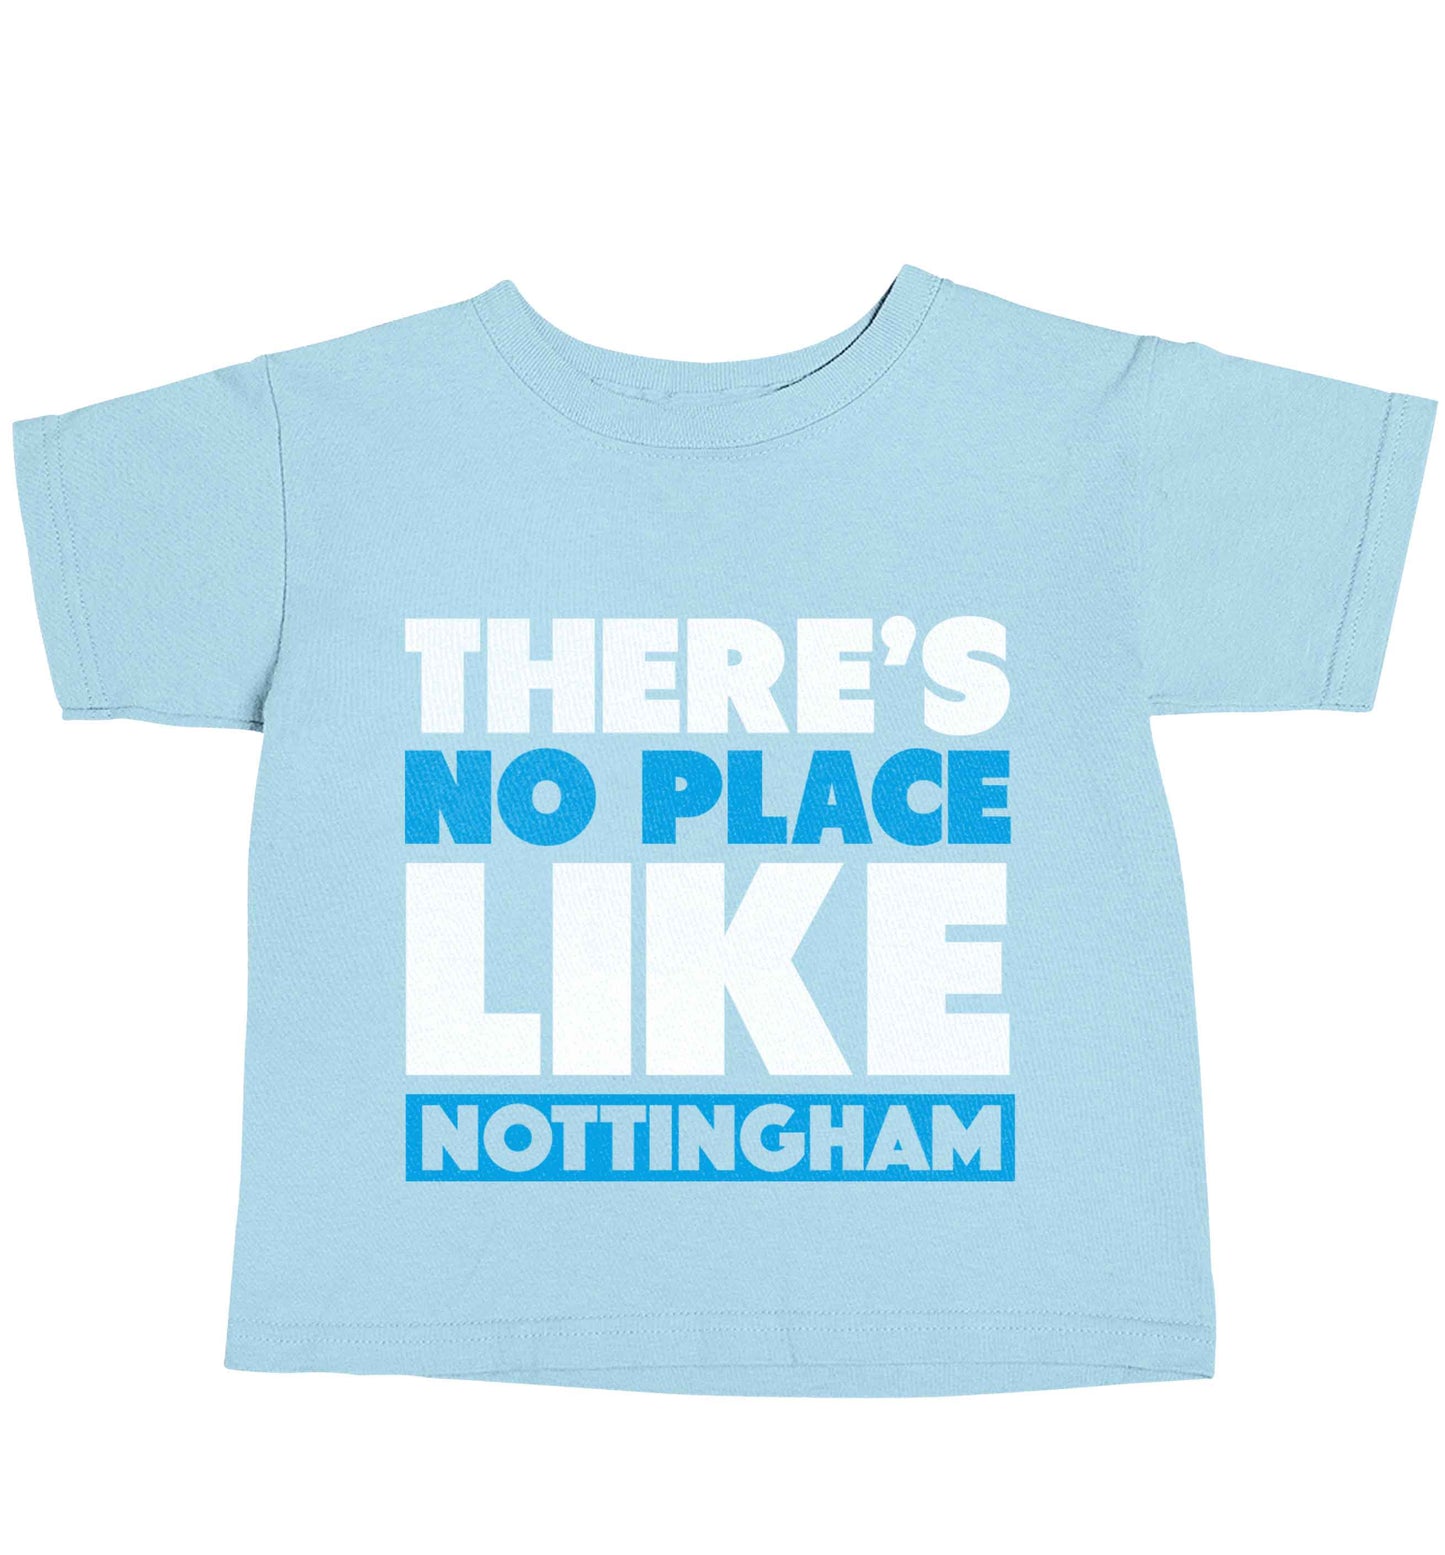 There's no place like Nottingham light blue baby toddler Tshirt 2 Years